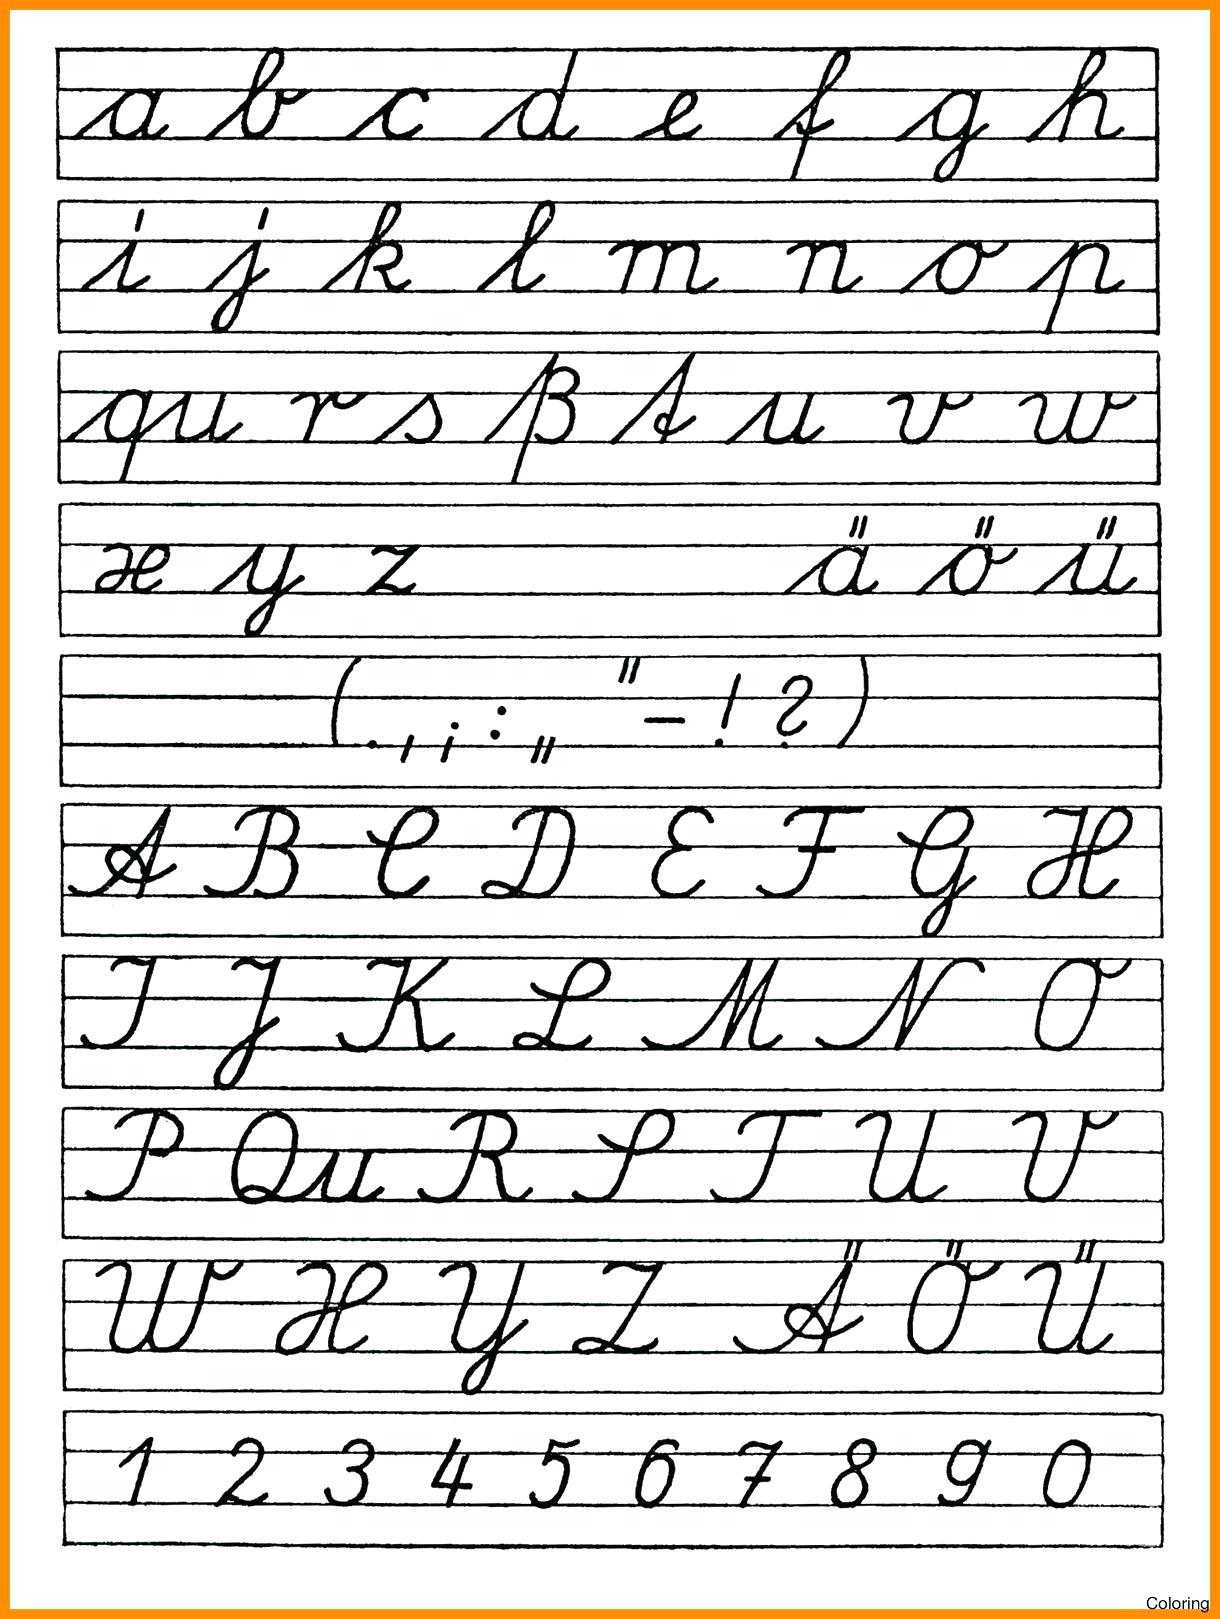 Printable Tracing Cursive Letters